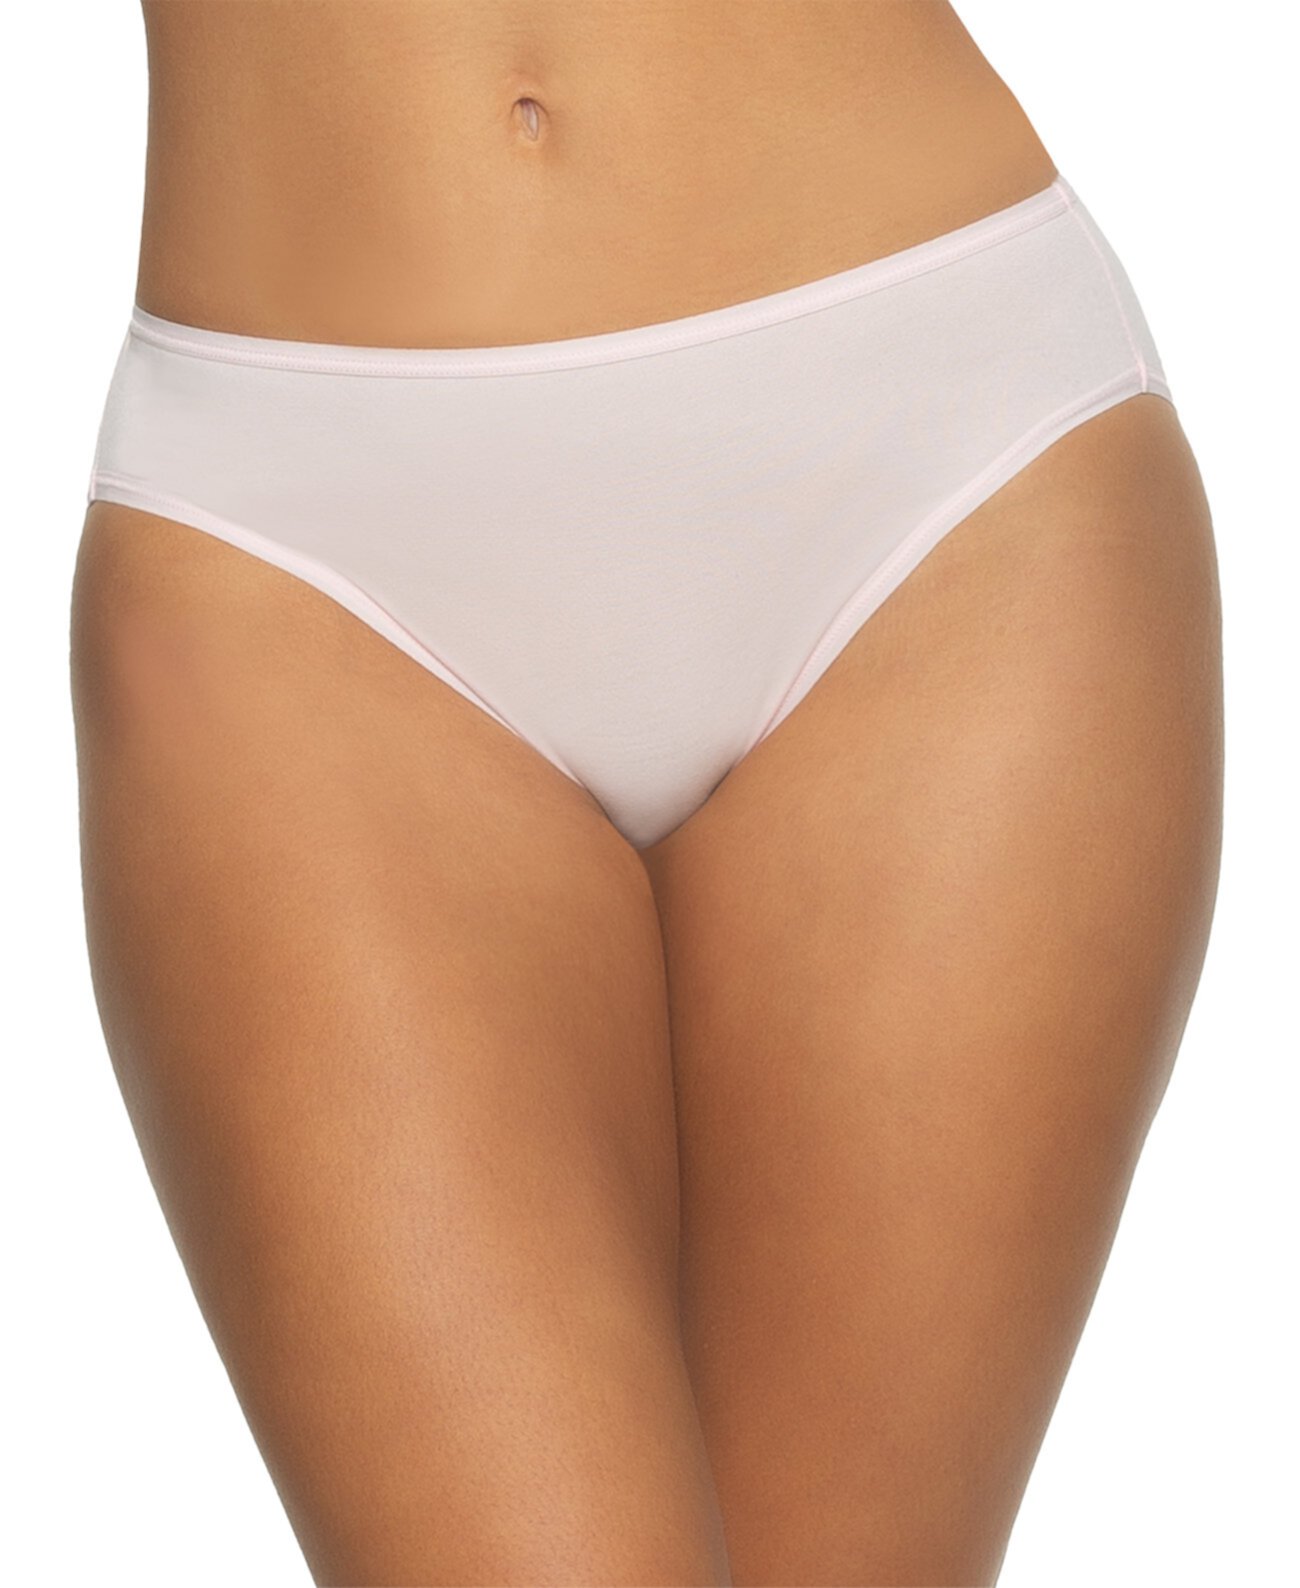 Women's 5-Pk. Hipster Underwear 650180P5, Created for Macy's Paramour